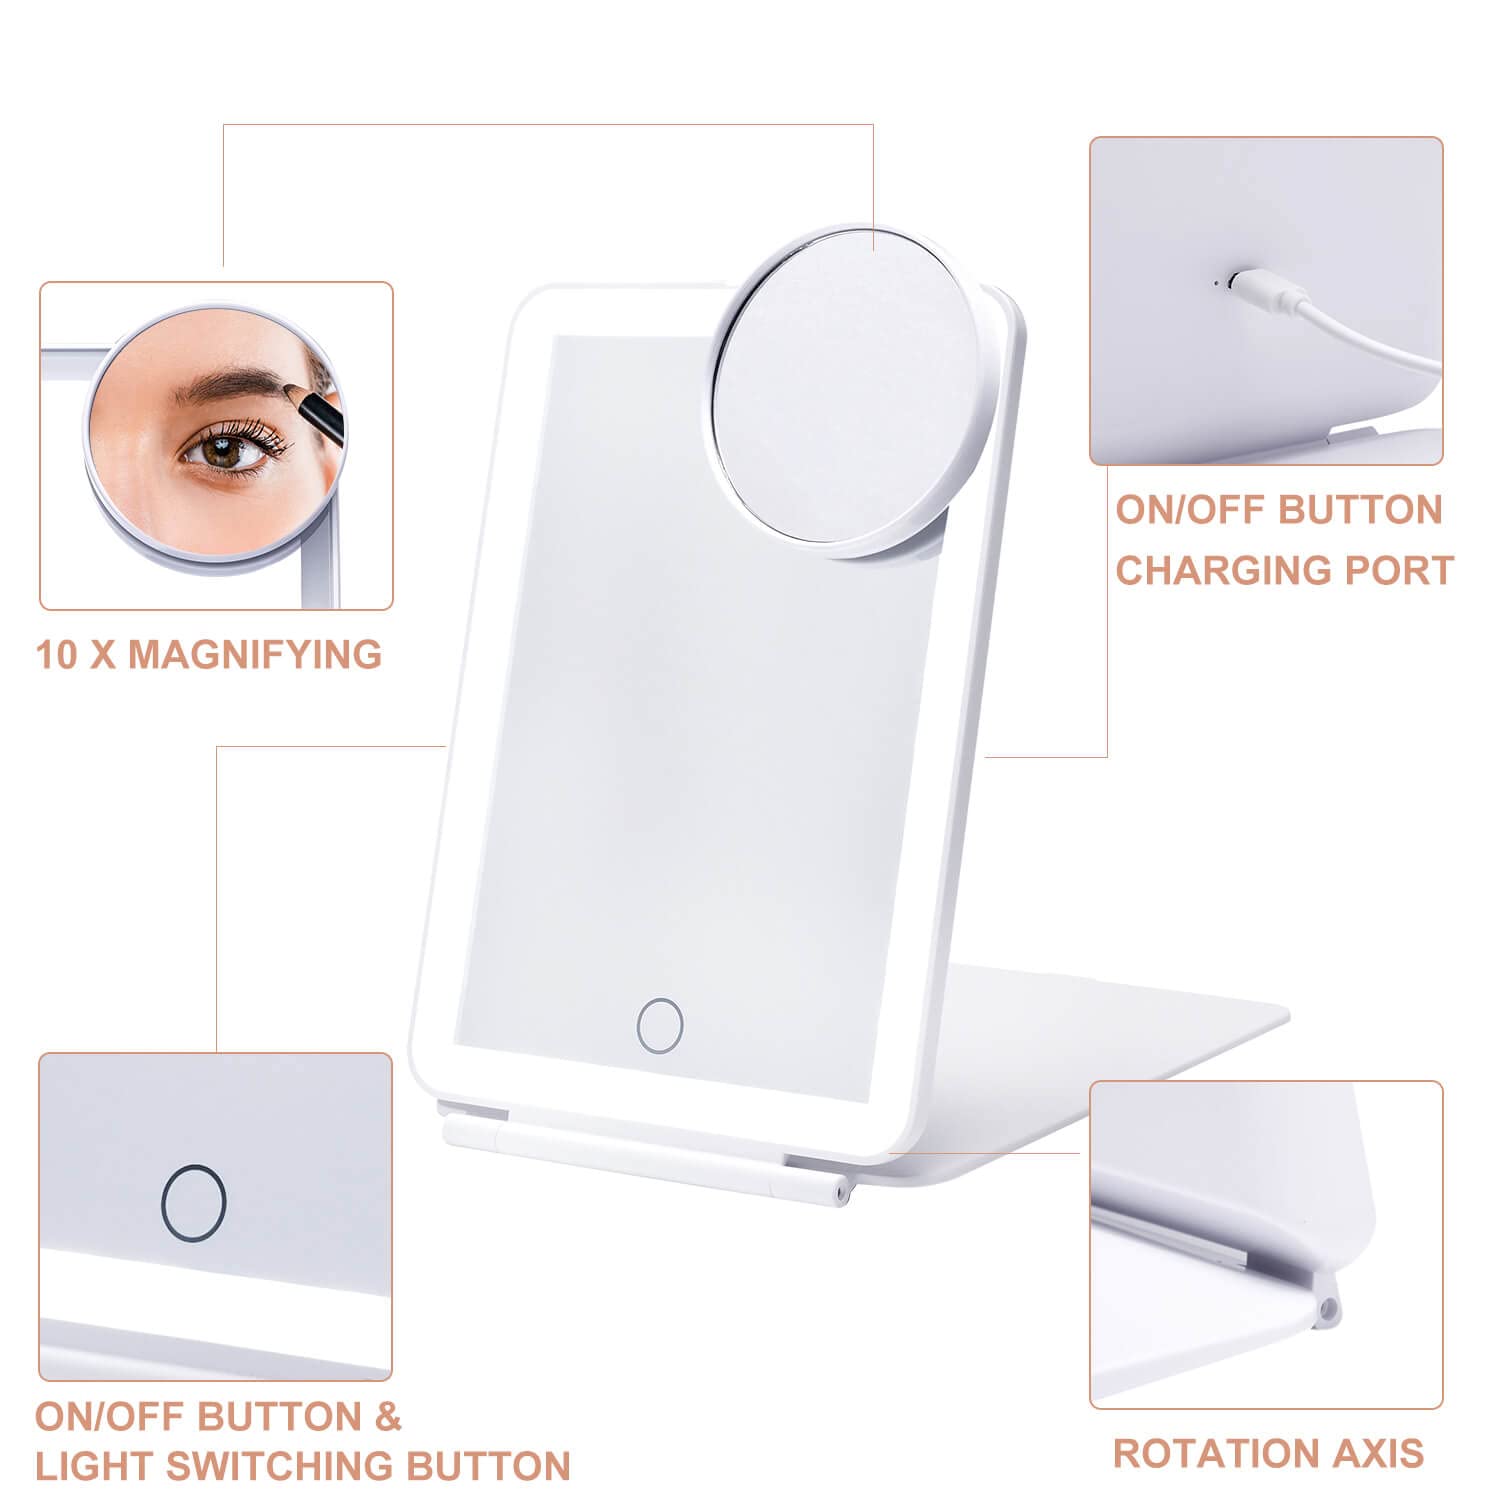 Mocado LED Foldable Travel Makeup Mirror - 5x7 inches 3 Colors Light Modes USB Rechargeable Touch Screen, Portable Tabletop Cosmetic Mi